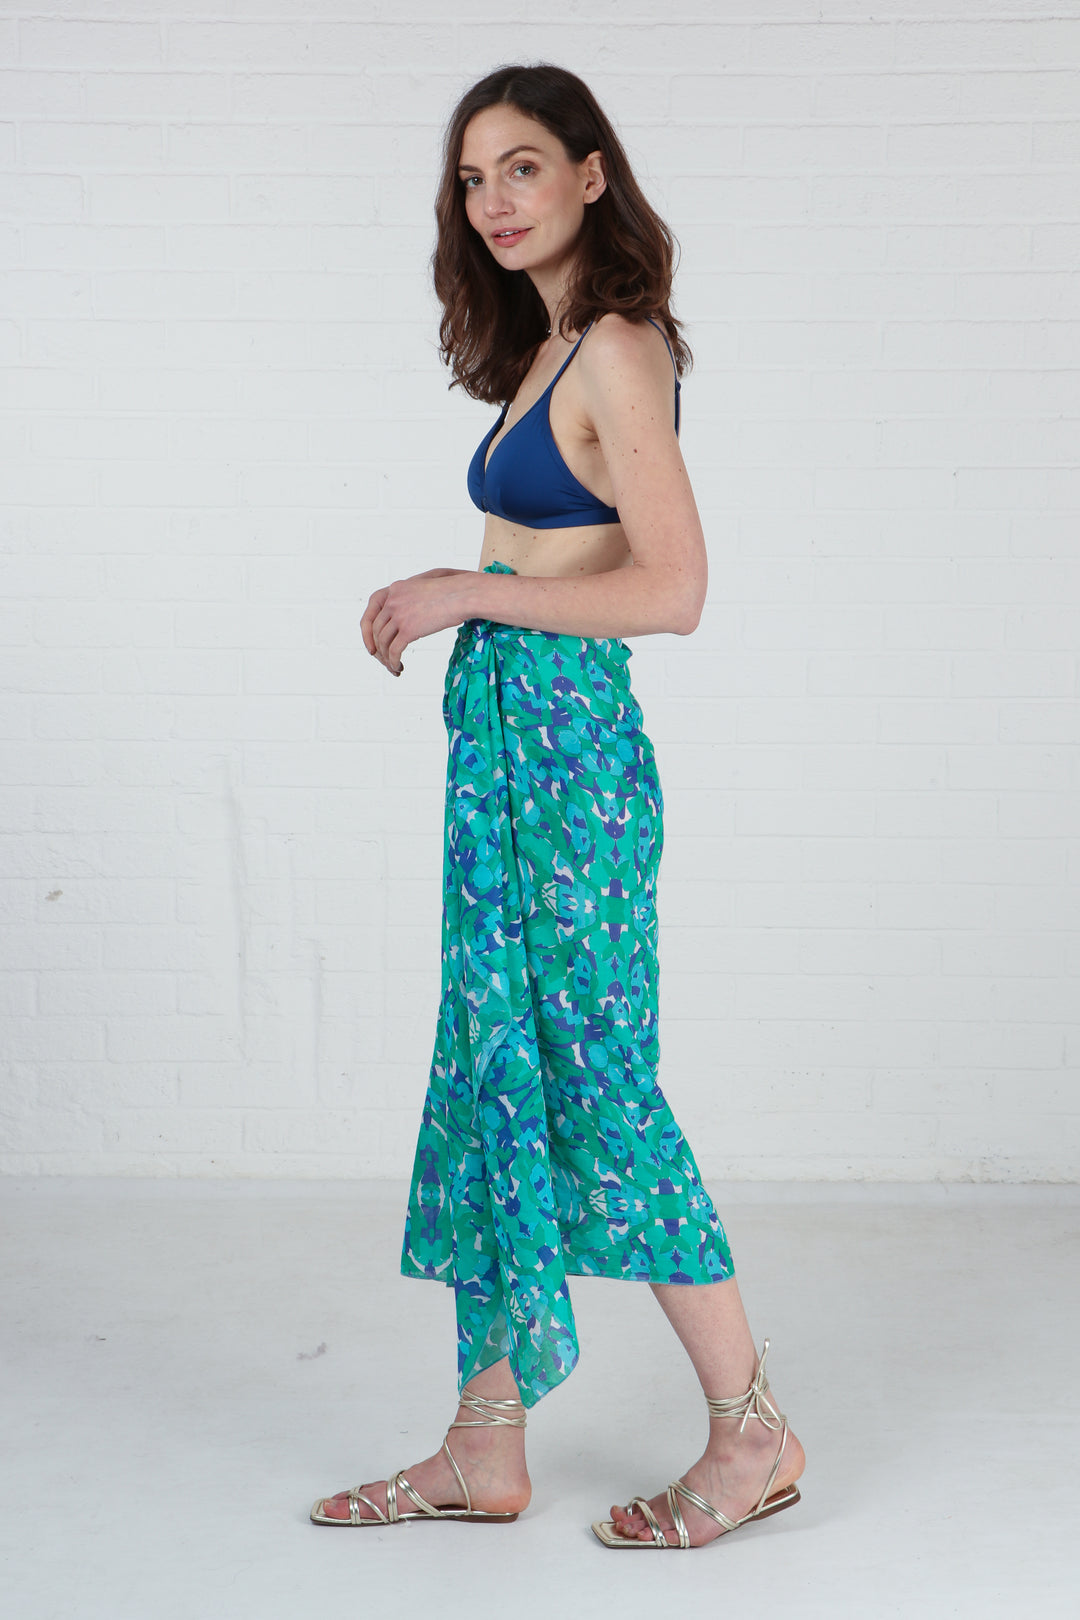 model wearing the abstract print green scarf as a beach sarong skirt